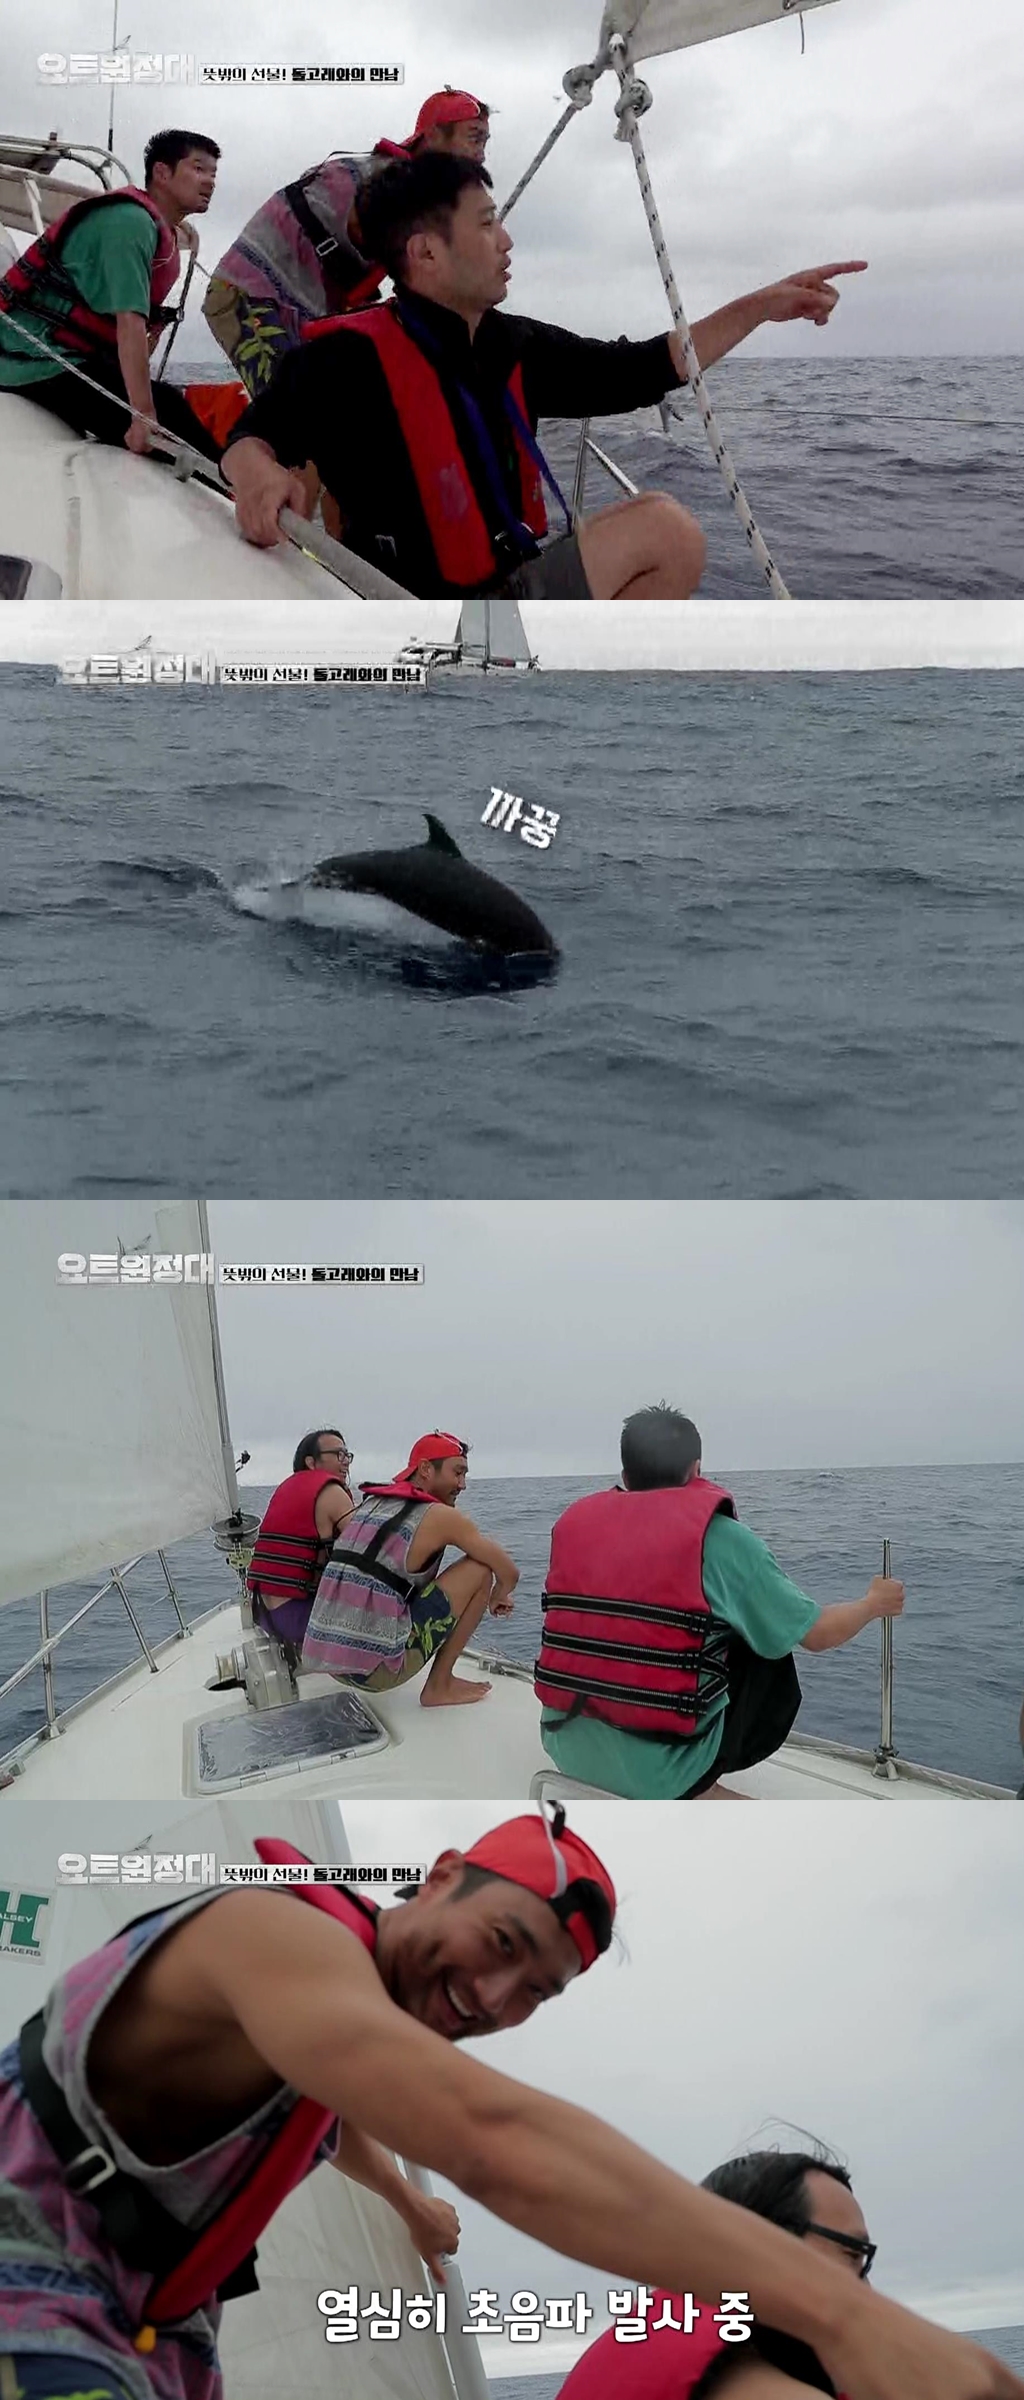 In Yot Expedition is the net Sea, it faces Dolphins.In the 7th episode of MBC Everlons Yacht Expedition, which will be broadcast on September 28, Jingu - Choi Siwon - Jang Gi Ha - Song Ho-joon, who starts a peaceful day again after an unexpected return decision, is drawn.The strong winds that have been swirling have disappeared and the members of the yachts enjoying the calm Sea as if they were at that time are expected to provide a different healing.In the meantime, the Yacht Expedition received an unexpected gift from the Sea: a cute bunch of Dolphins came to the side of the Yacht Expedition.The Dolphins that appeared on the deep blue waves are not one, but several, and they have produced spectacular views over the Sea.The members of the Dolphins who escorted the yacht expedition and moved together said that they could not shut up with the Wow and the Great stretching.The Dolphins reached out to reach and made the crew into concentricity.In particular, Choi Siwon, the youngest, whistled and tried to communicate with Dolphins, attracting attention with a playful Boy.Choi Siwon is said to have fallen into the shape of Dolphins swimming in the Sea with a white spray for a while.The Sea, which had been terrorized by threatening waves, made the crew laugh with a ecstatic gift as if comforting the yacht expedition.What was the voyage with the Dolphins that left unforgettable memories to the crew, and the wonder of Mother Nature adds to the expectation of the voyage of the Yacht Expedition.MBC Everlon Yot Expedition is broadcast every Monday at 8:30 pm.iMBC  MBC Everlon Screen Capture